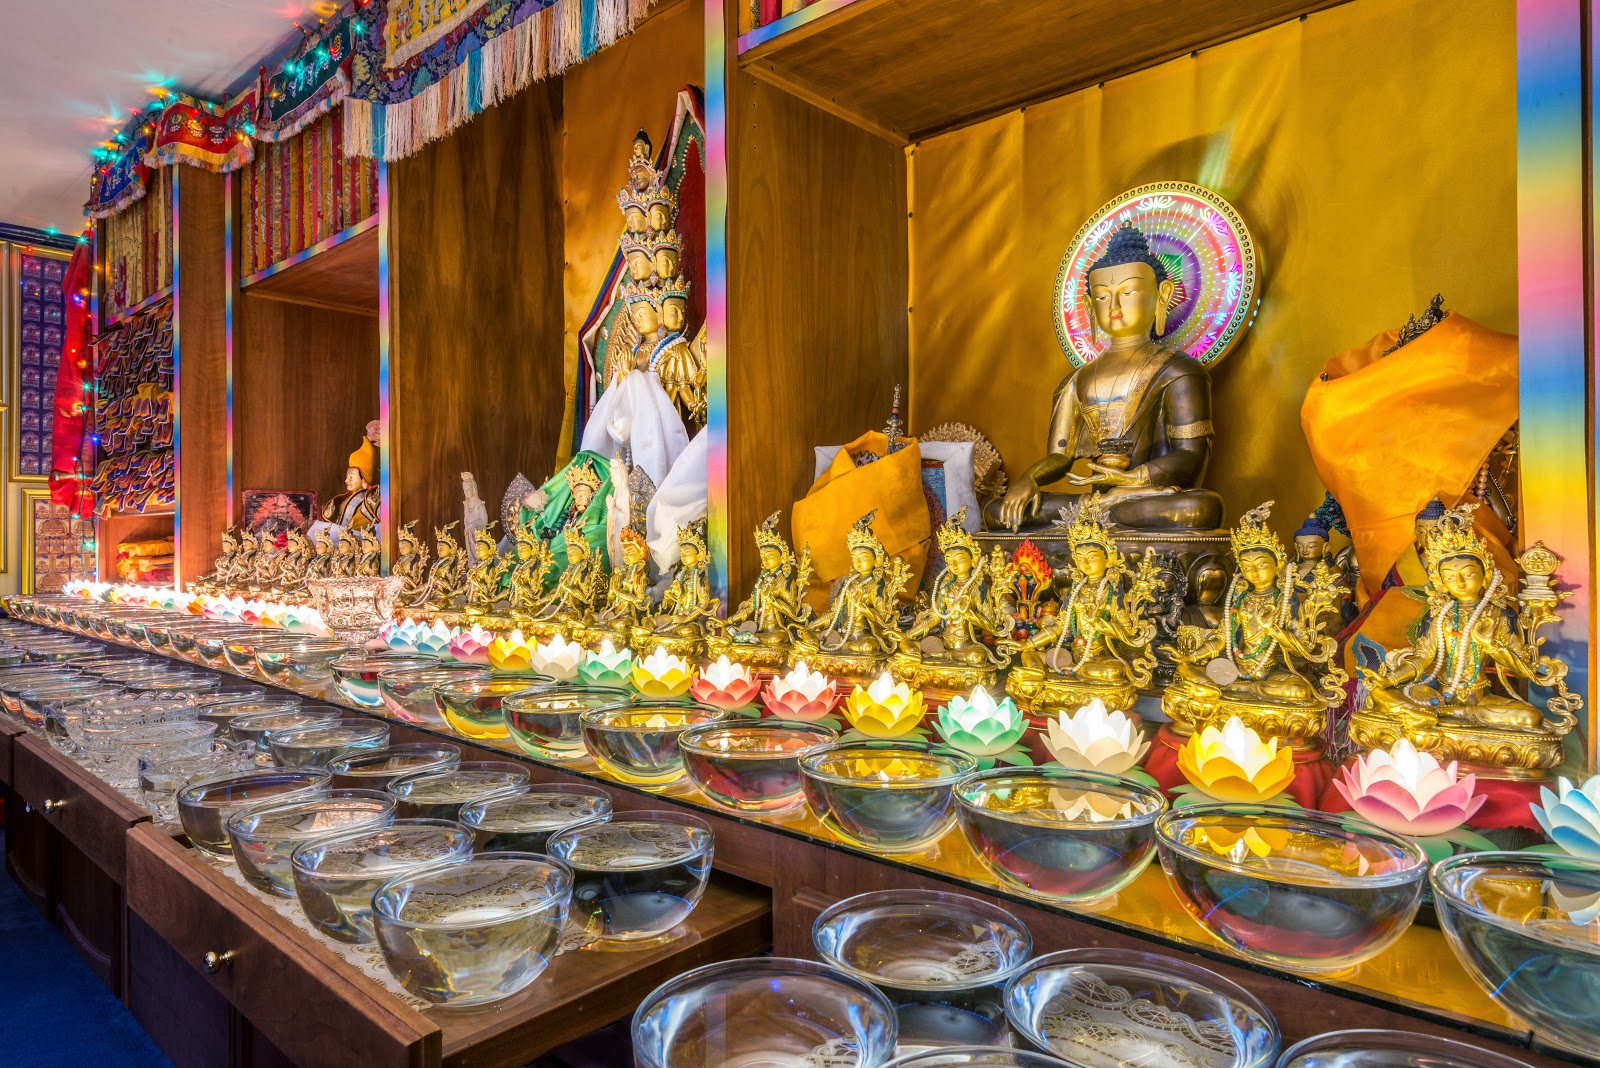 Holy objects and extensive offerings at Kachoe Dechen Ling. Photo by Chris Majors.